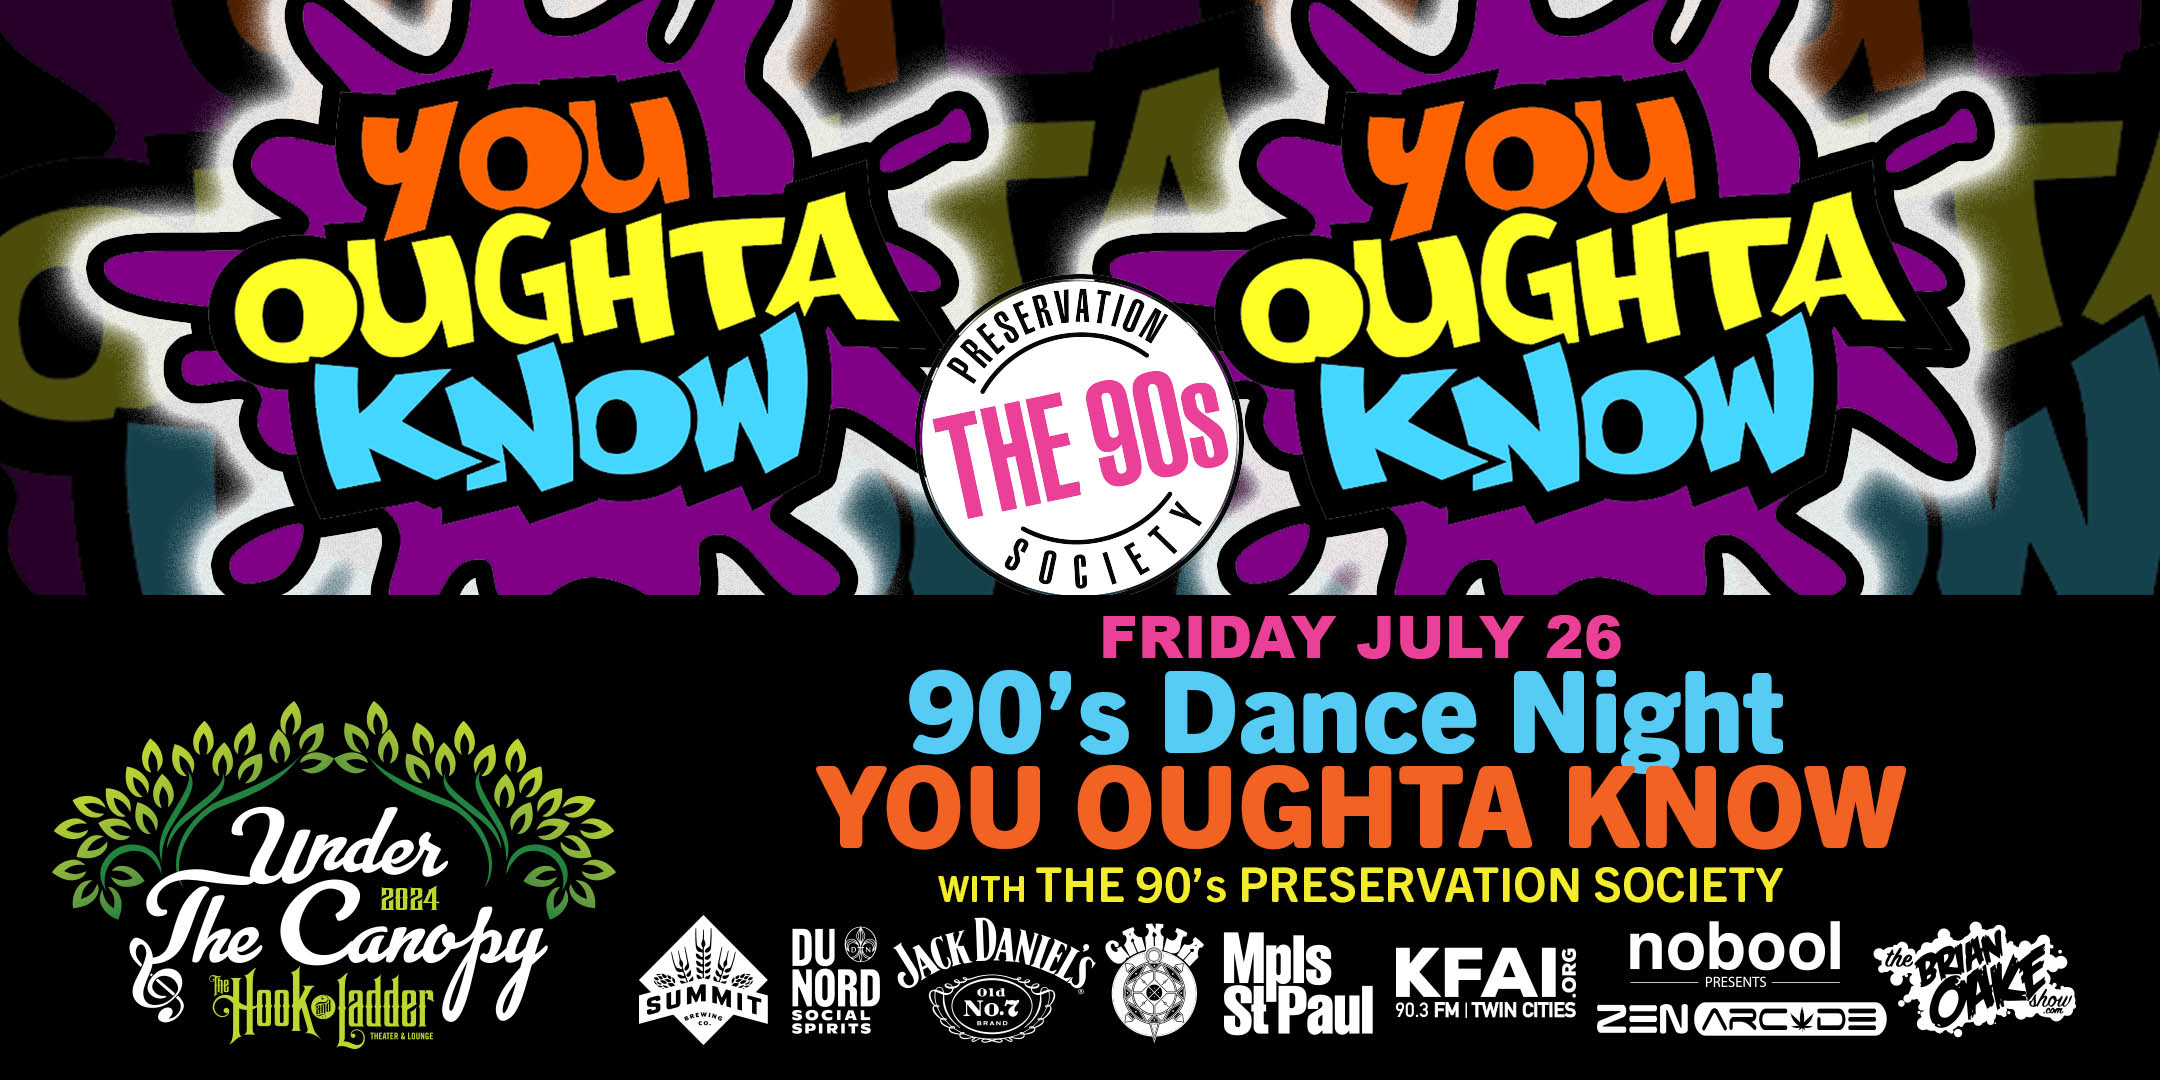 90s Dance Night featuring You Oughta Know with The 90s Preservation Society DJ / VJ Friday, July 26 Under The Canopy at The Hook and Ladder Theater "An Urban Outdoor Summer Concert Series" Doors 6:00pm :: Music 7:00pm :: 21+ Reserved Seats: $35 GA: $19 ADV / $25 DOS *Does not include Fees